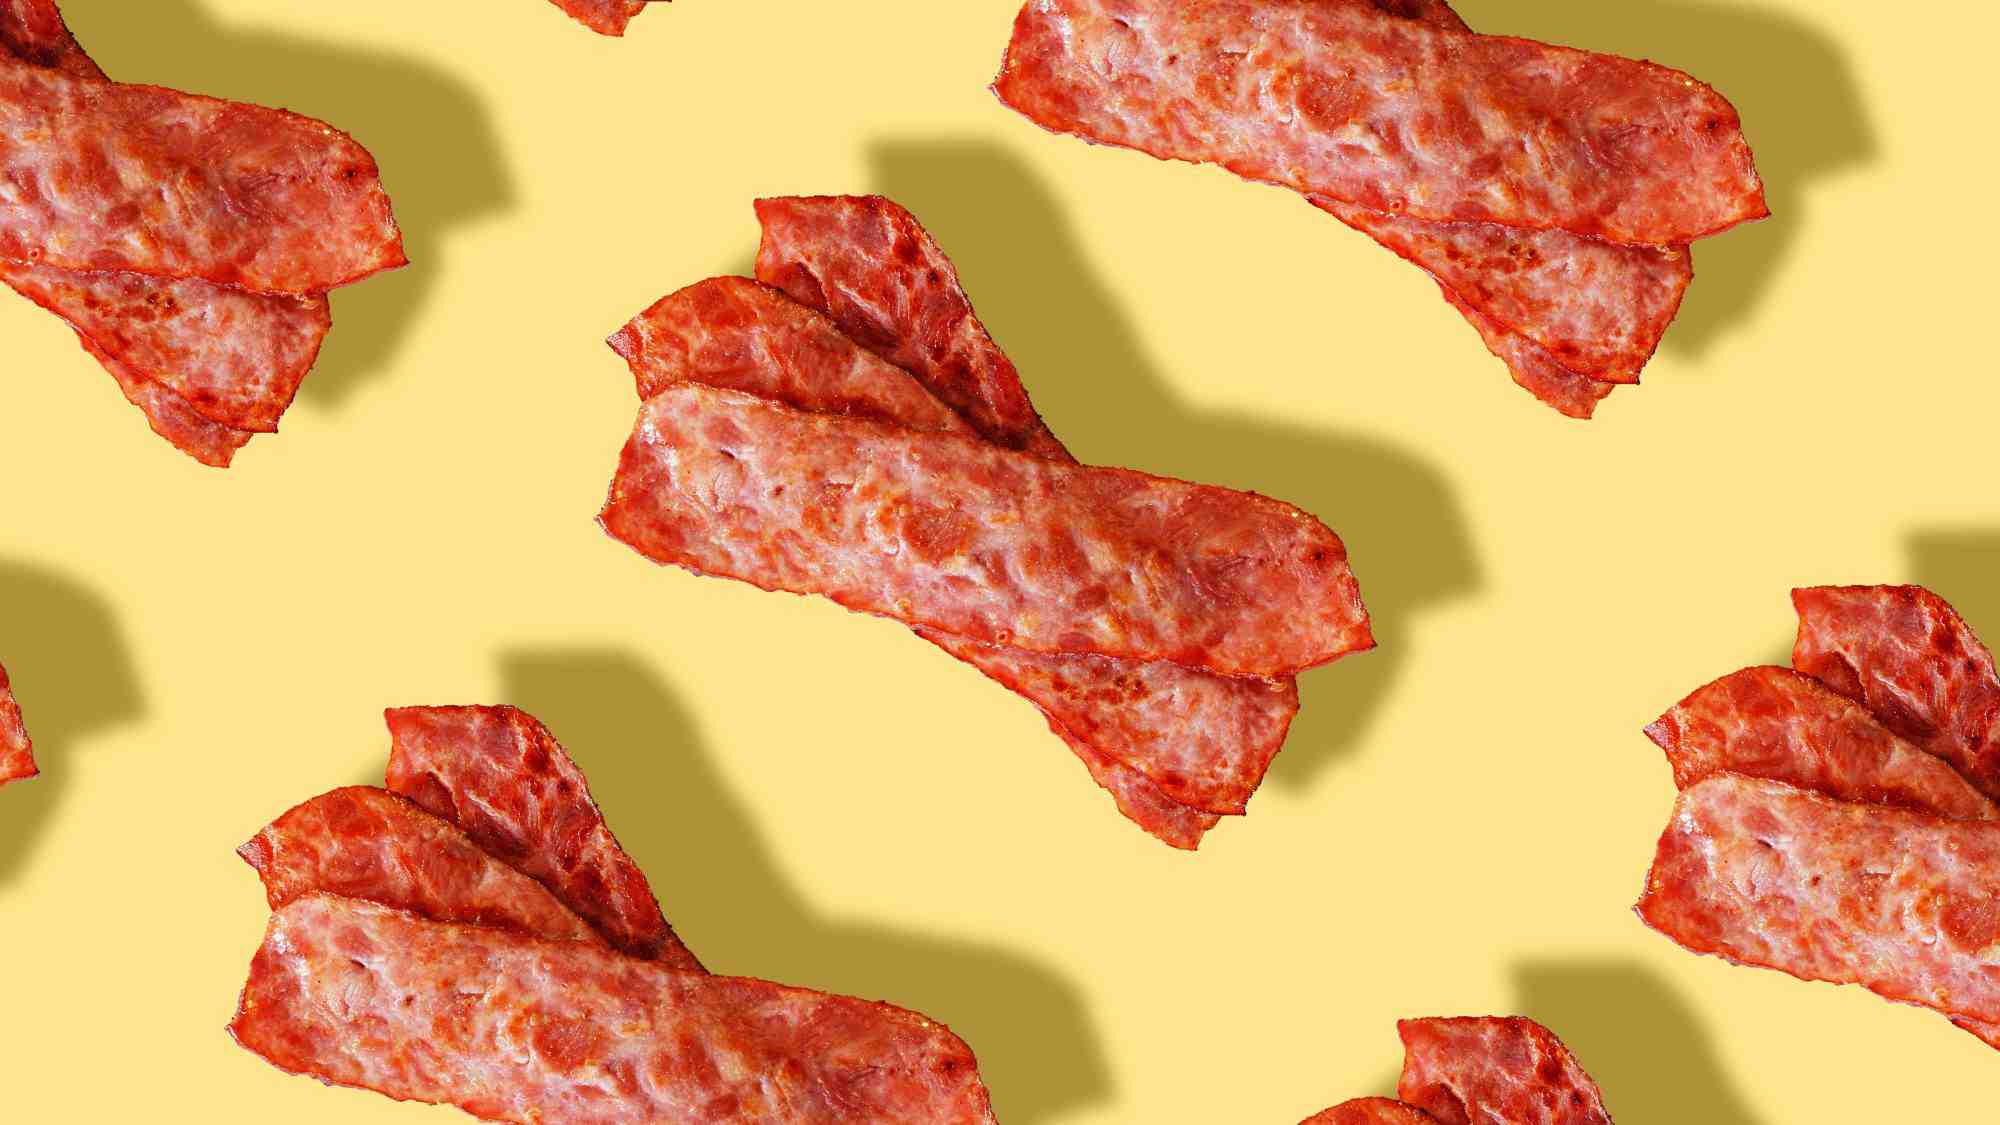 Is uncured bacon healthy?